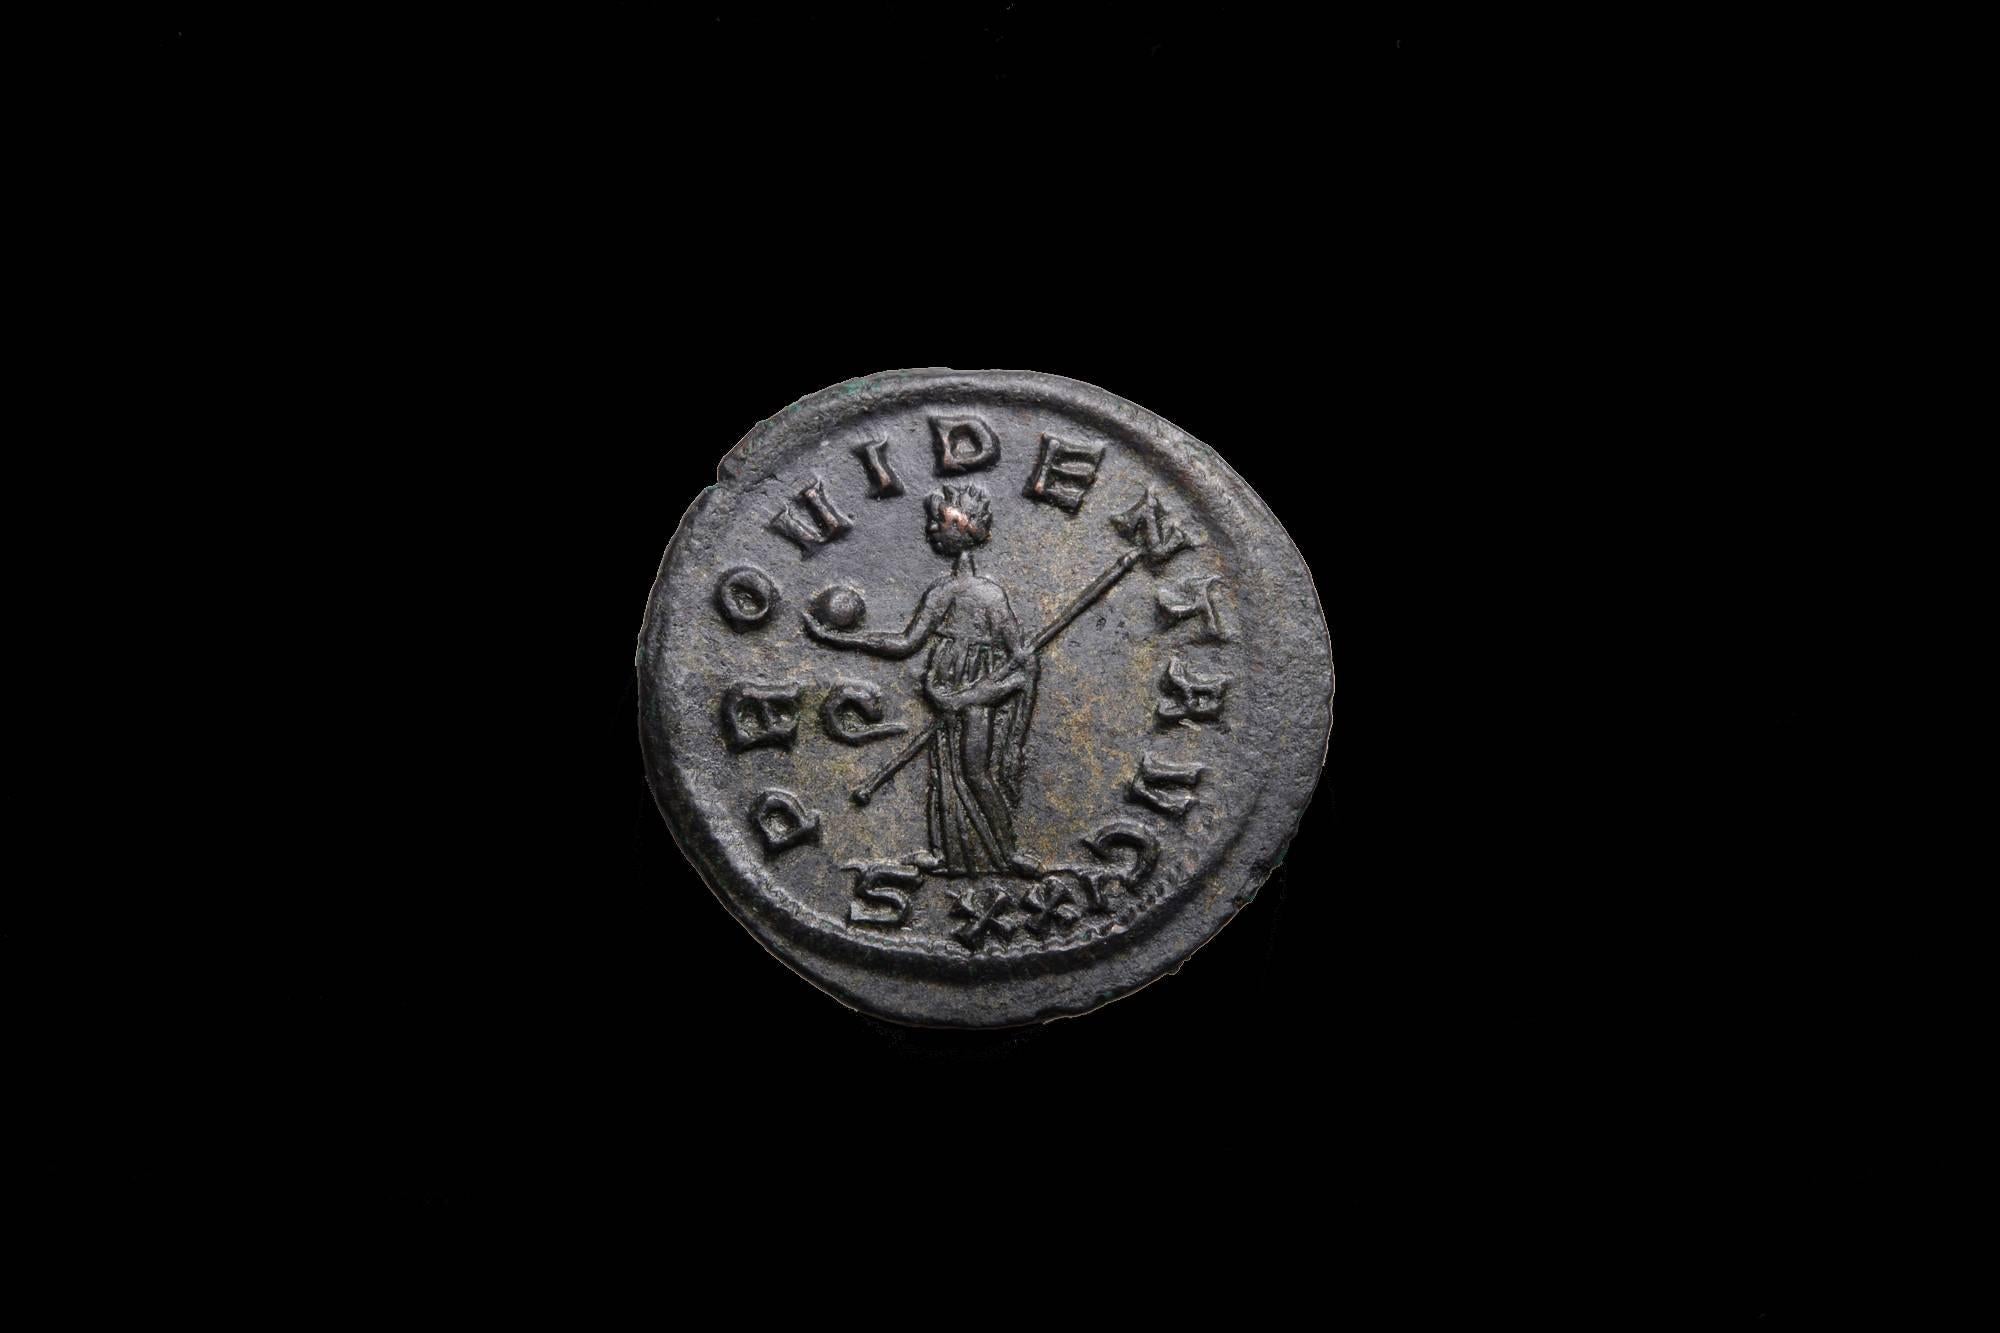 A beautiful ancient Roman antoninianus, minted under Emperor Probus, (Marcus Aurelius Probus Augustus). Struck, circa 280 AD, at the Ticinum mint.

The obverse with a fine bust of Probus, shown wearing an ornate mantle, radiate crown and holding